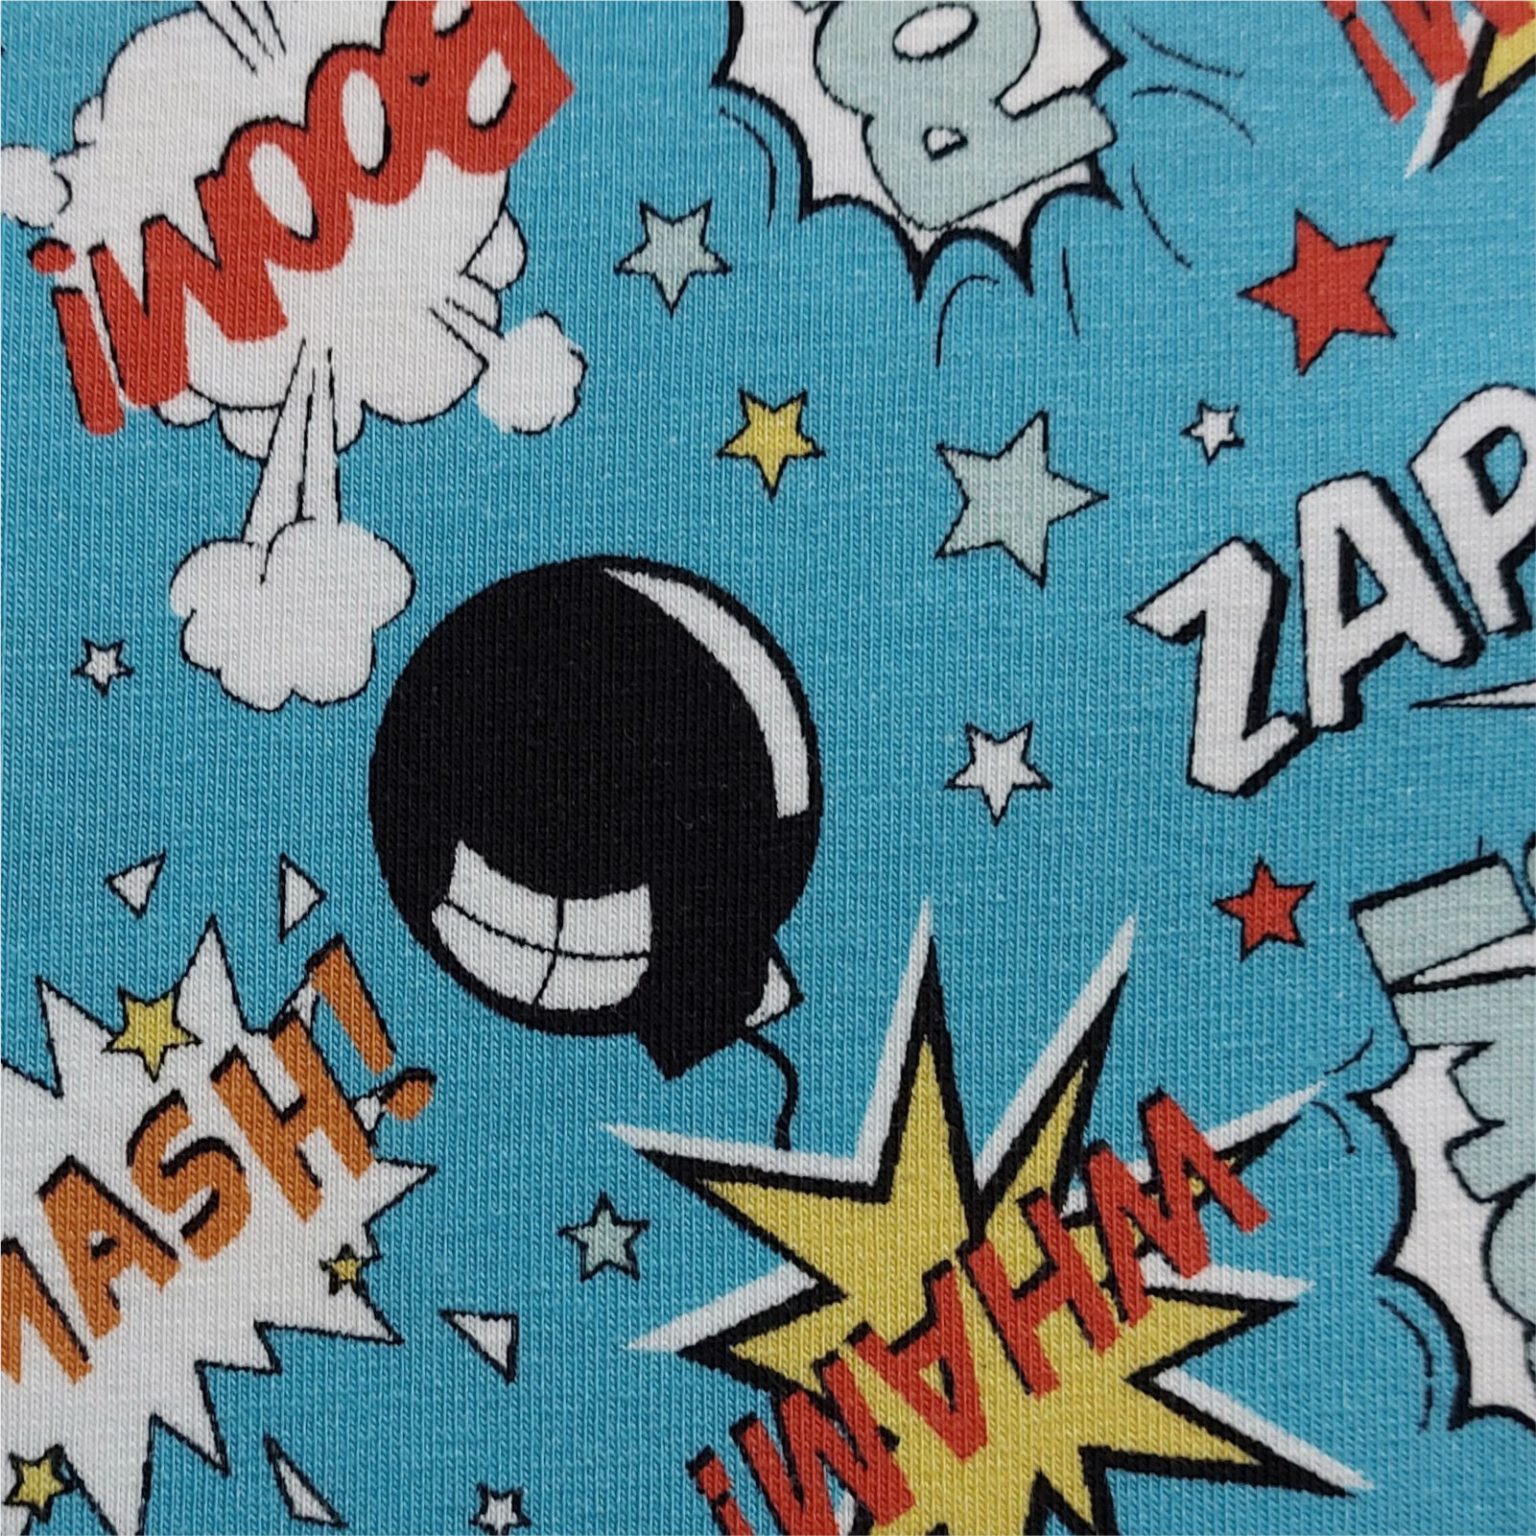 Boom Jersey Fabric at More Sewing